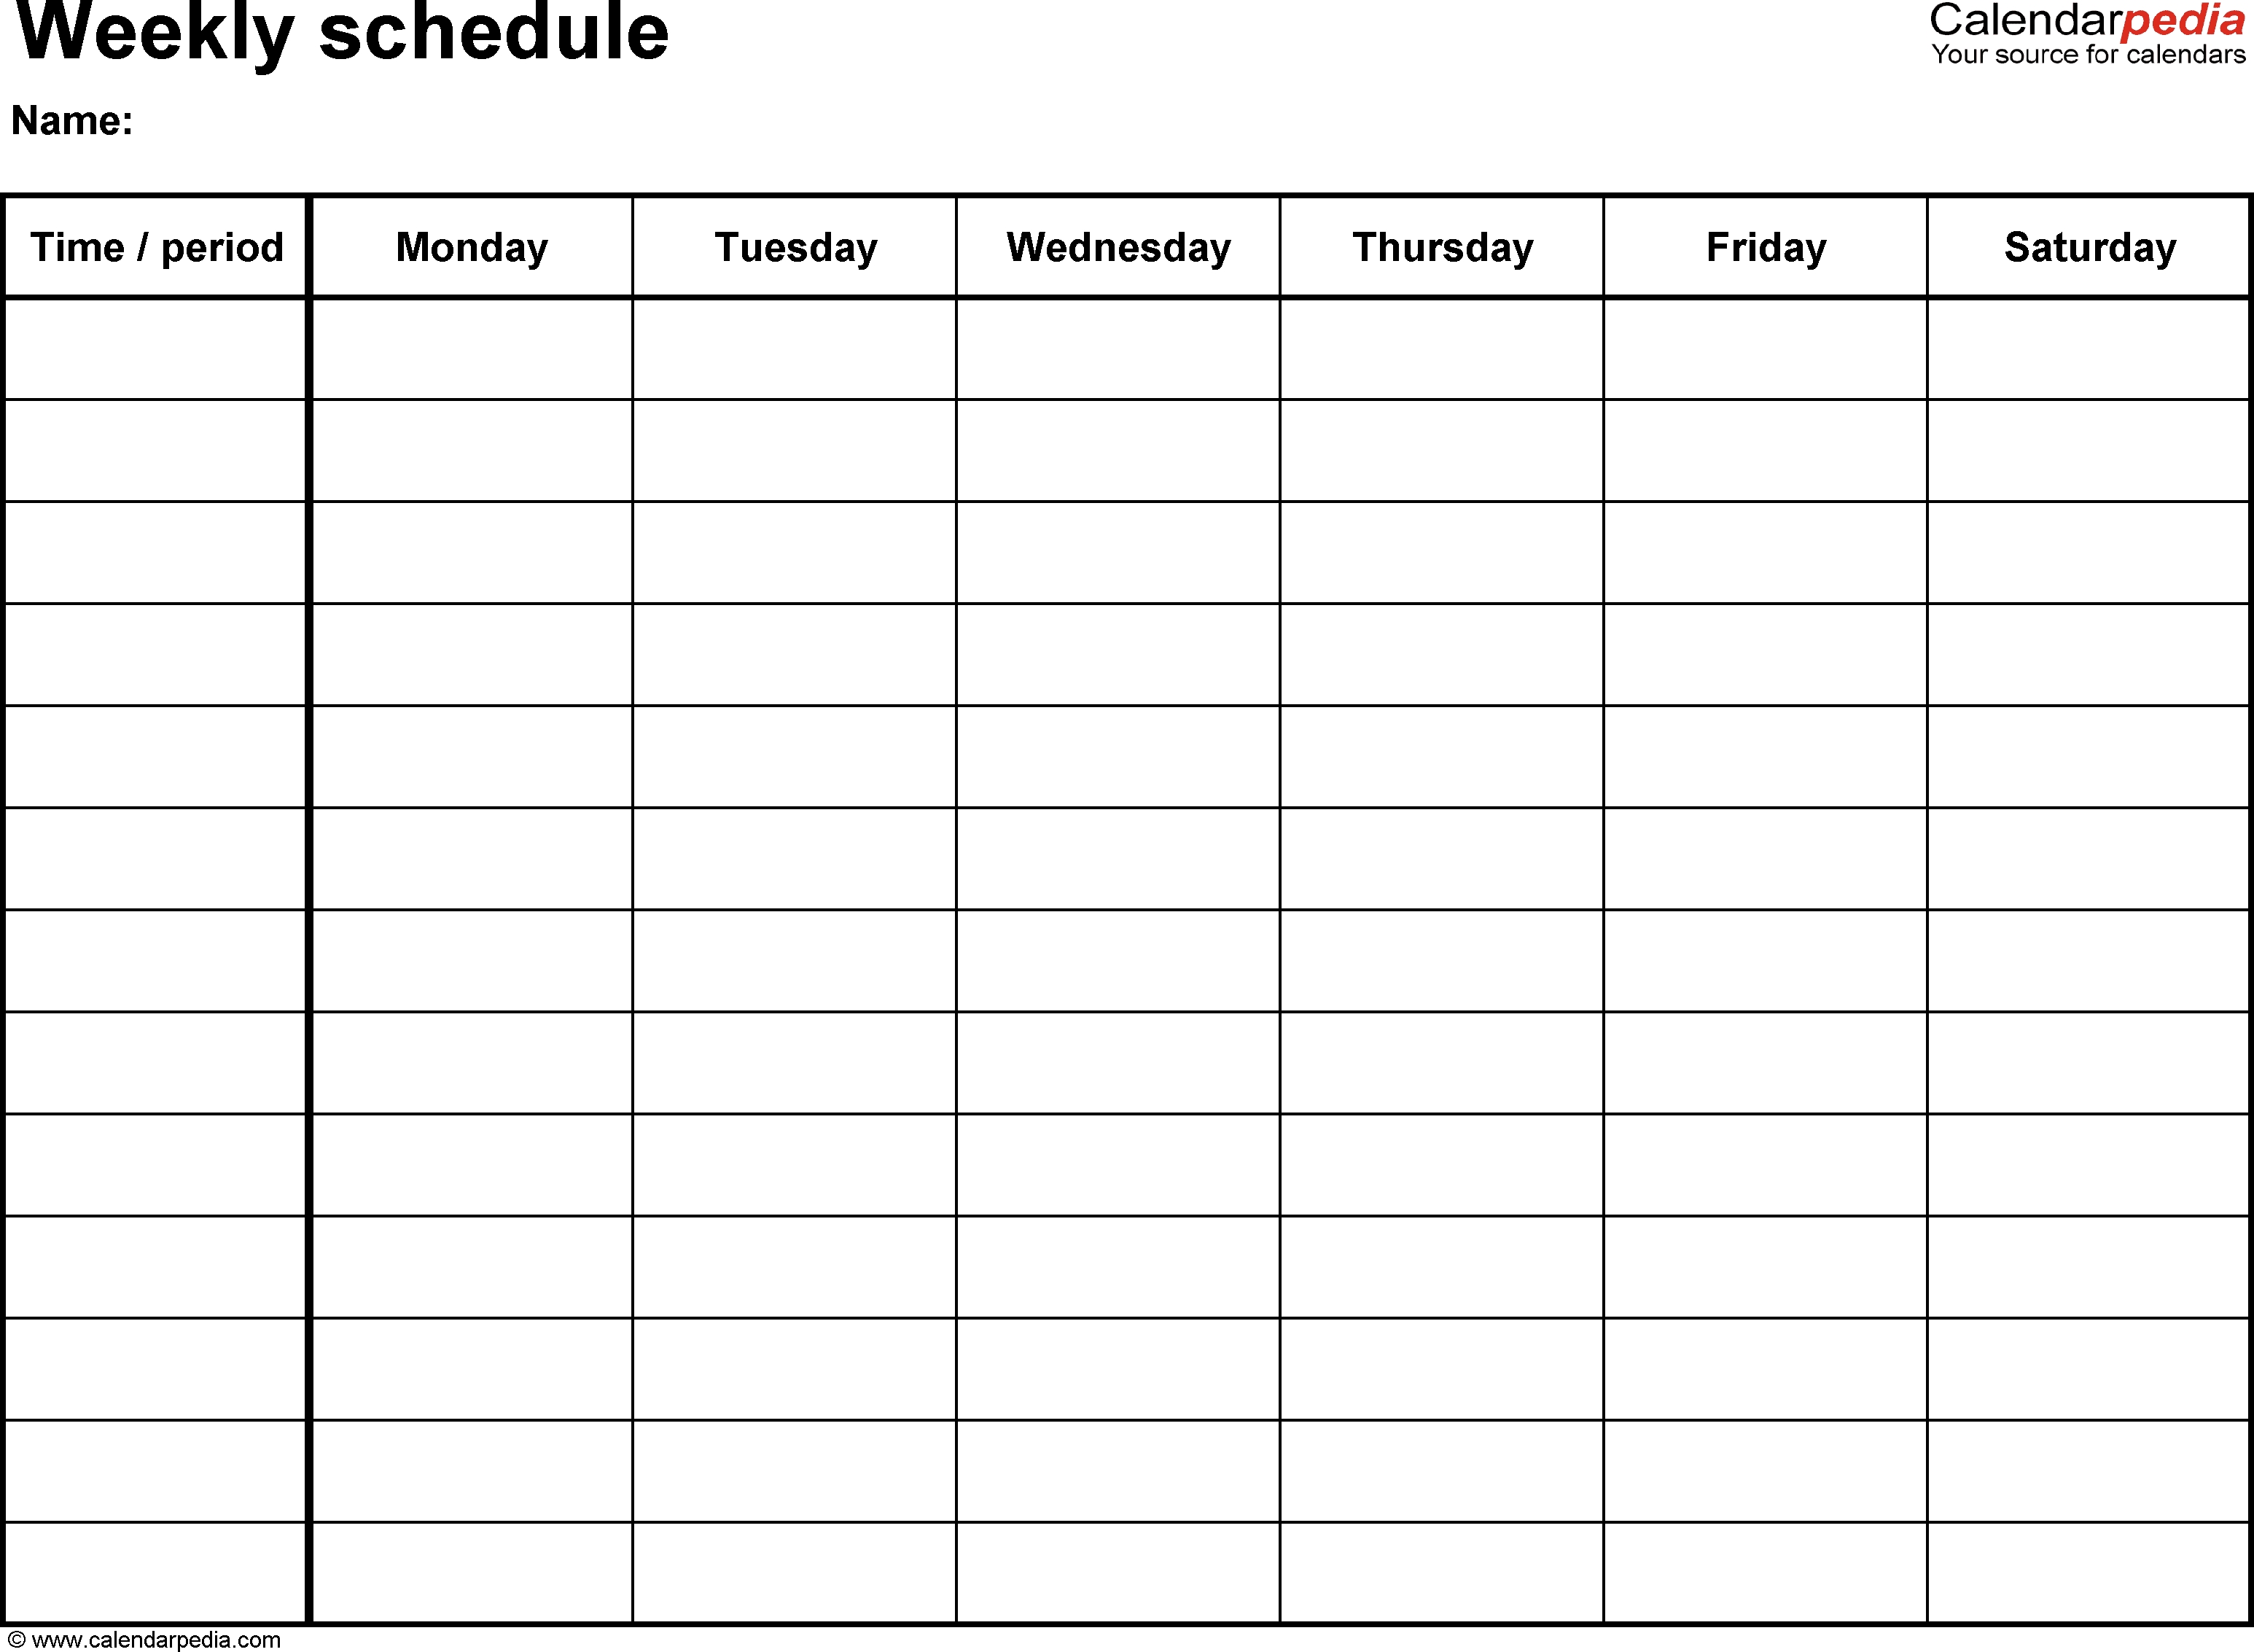 Free Weekly Schedule Templates For Pdf - 18 Templates inside Extra Large Printable Blank Weekly Employee Schedule